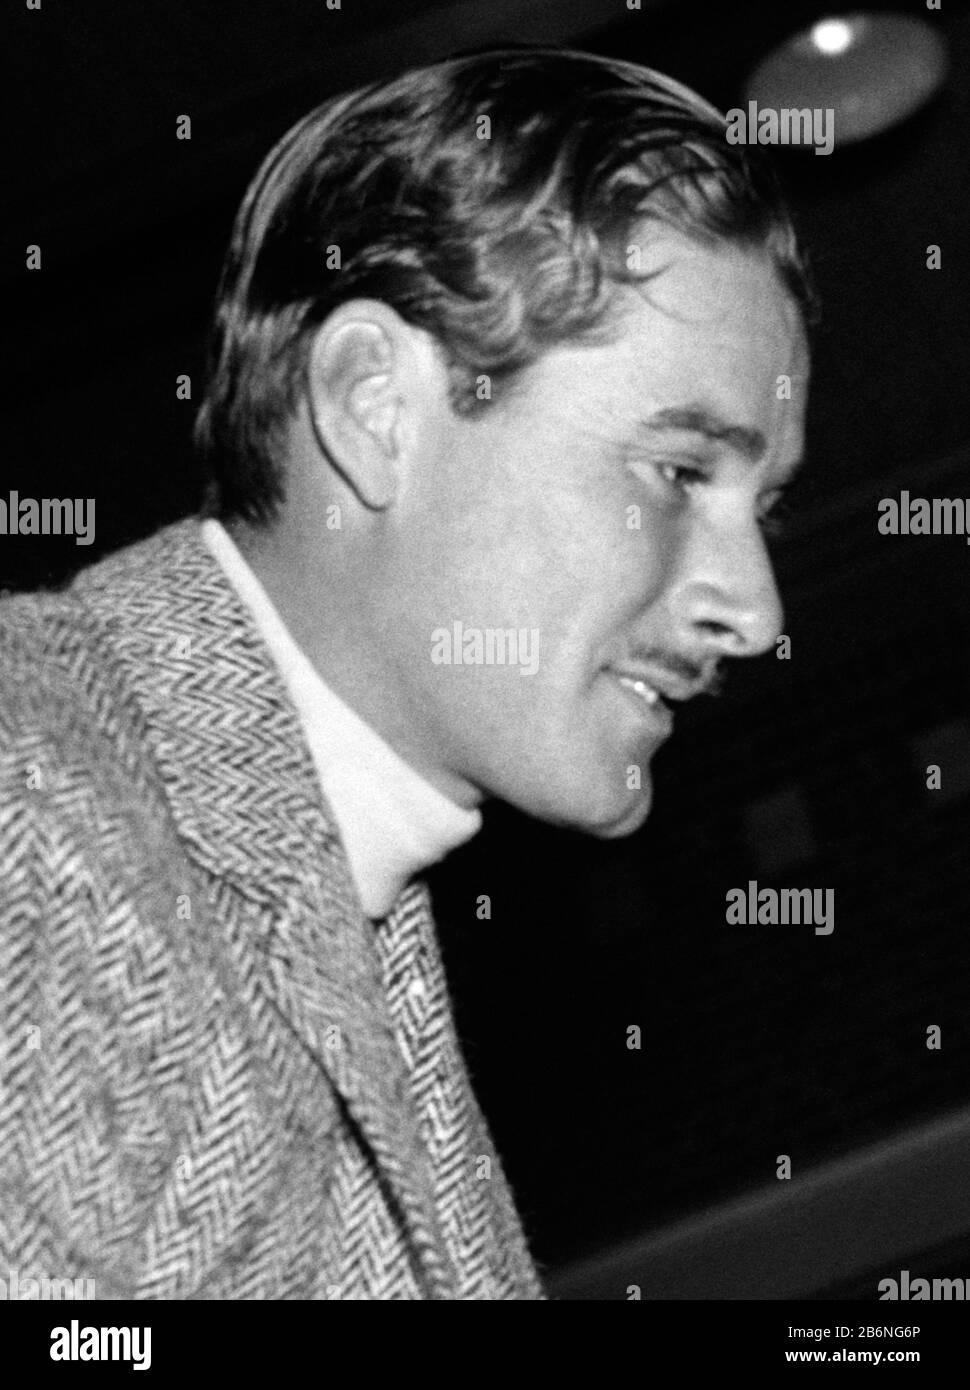 Vintage photo of Australian-born movie star Errol Flynn (1909 – 1959). The photo by Harris & Ewing was taken on January 25 1939 at a horseshow held at Fort Myer, Virginia, as part of birthday celebrations for President Franklin D Roosevelt. Stock Photo